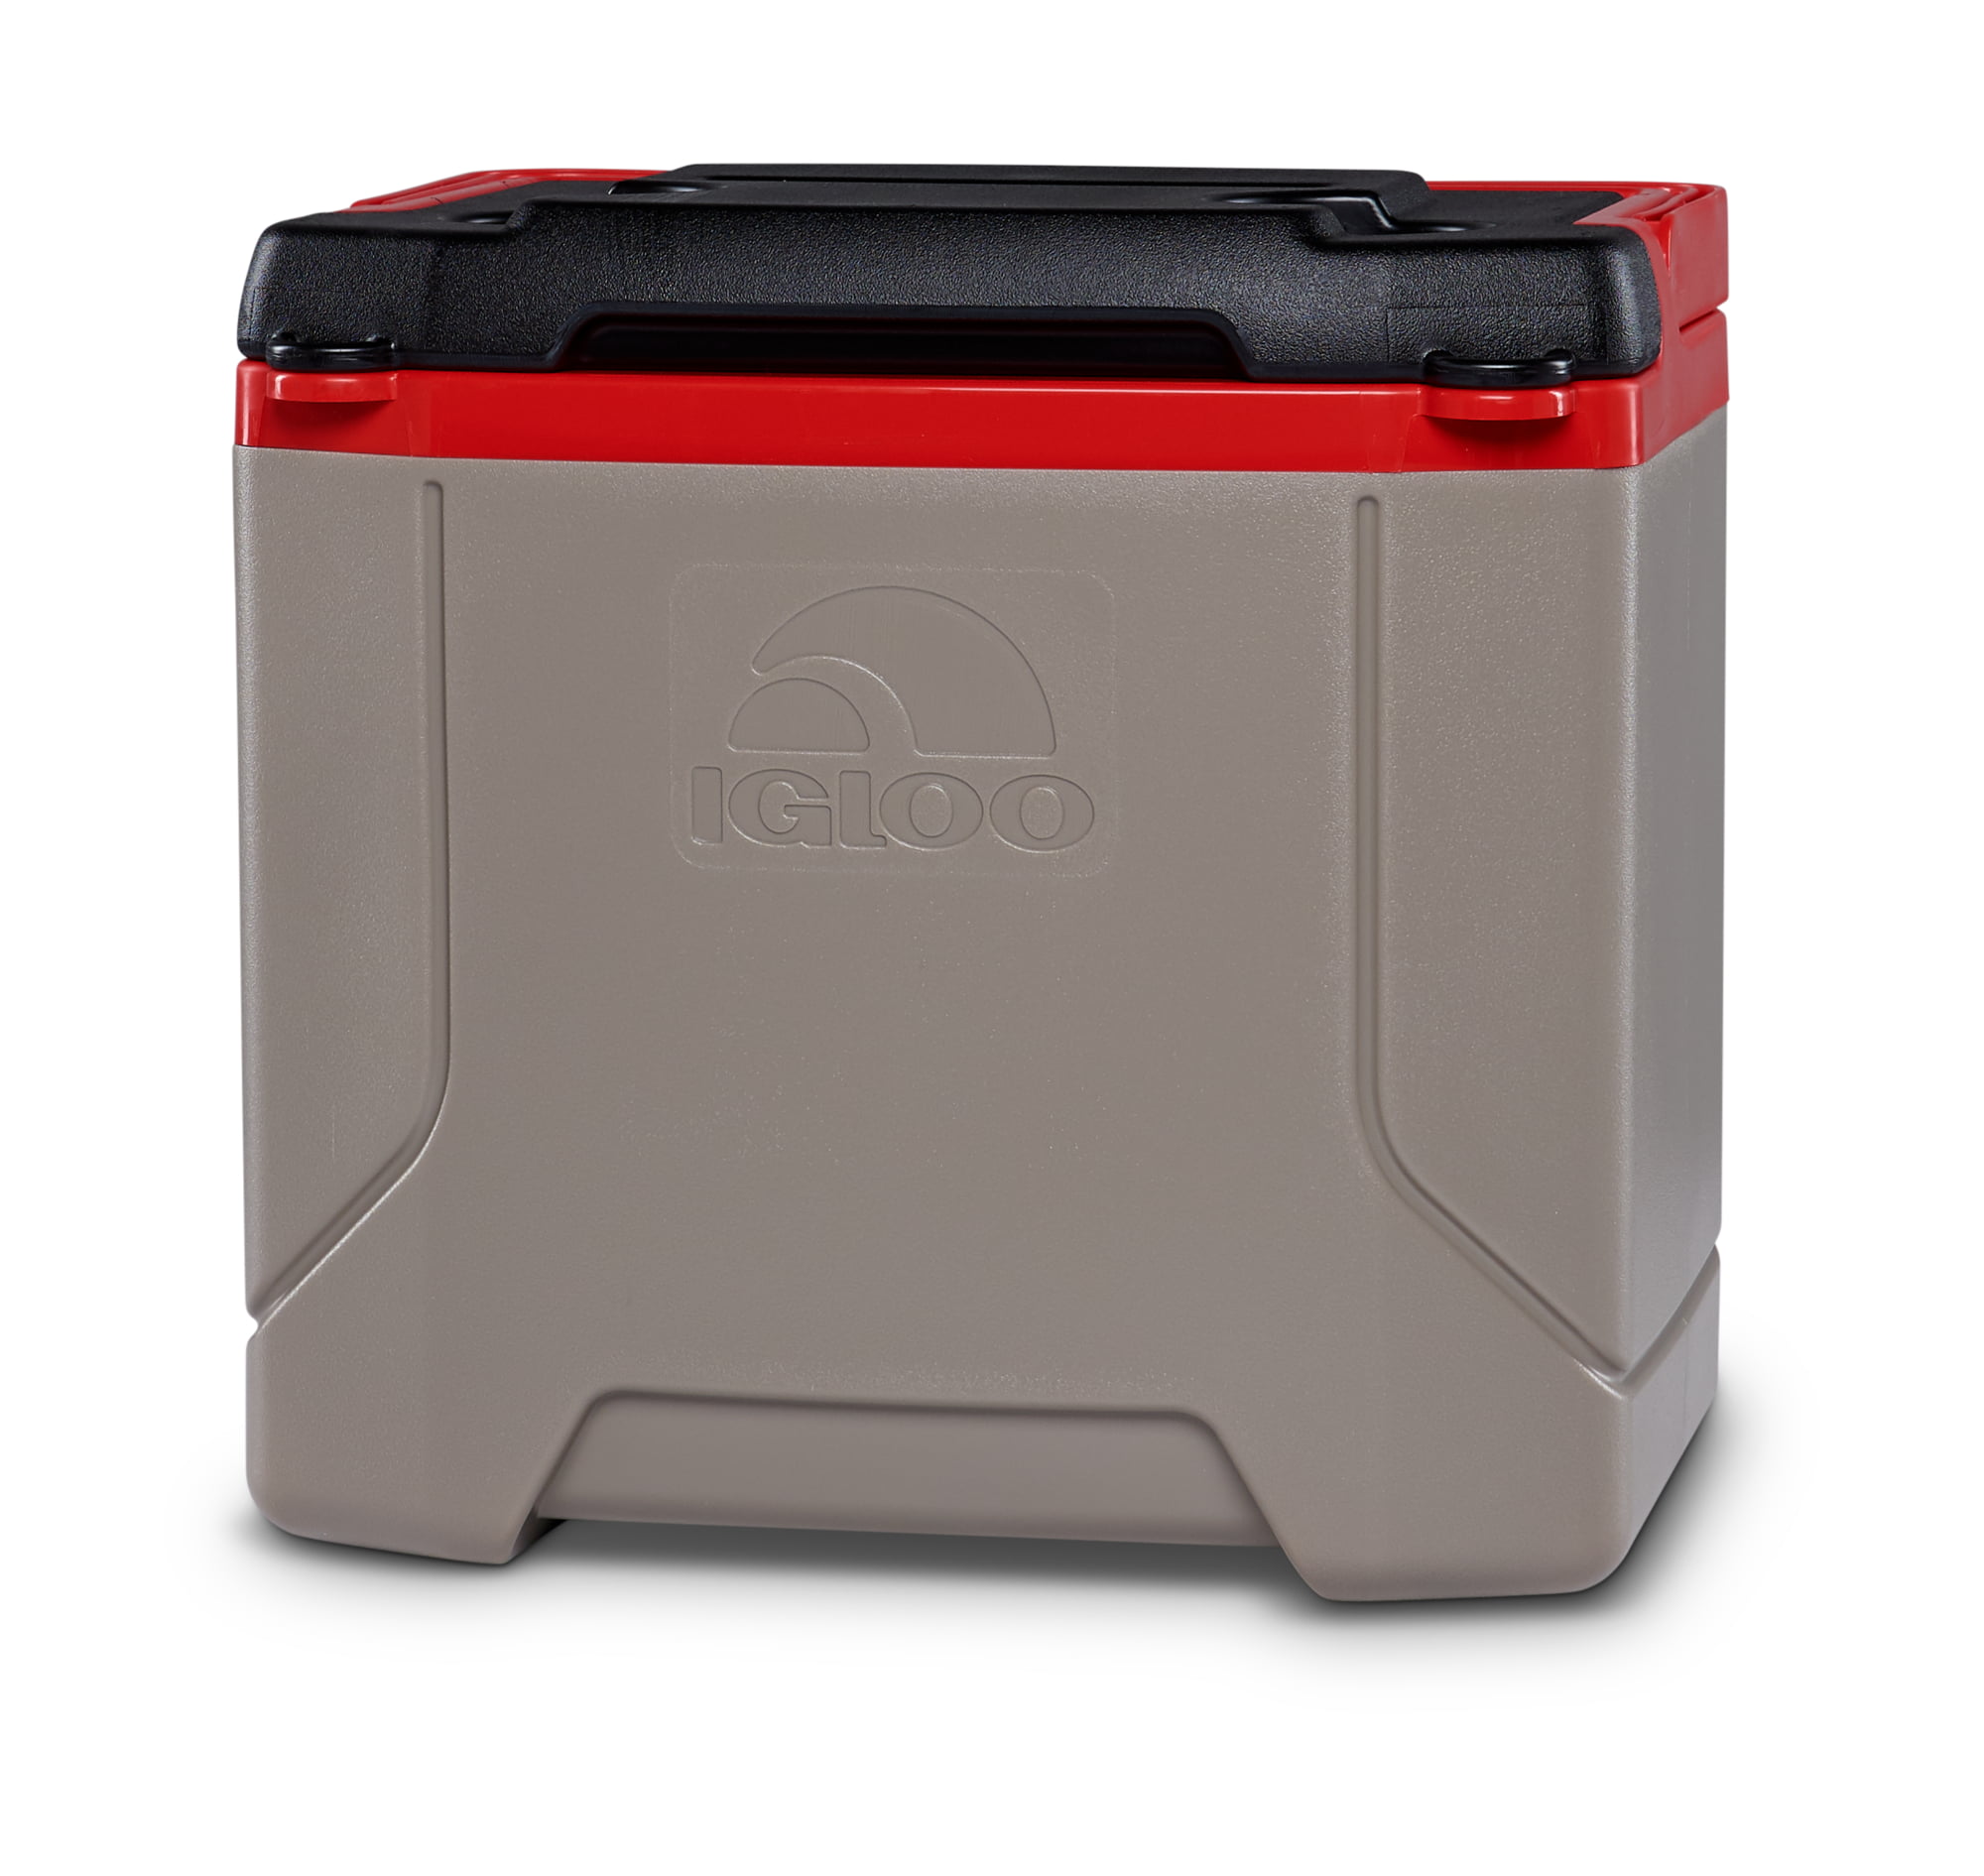 Igloo 16 qt. Profile Series Ice Chest Cooler - Beige with Red 